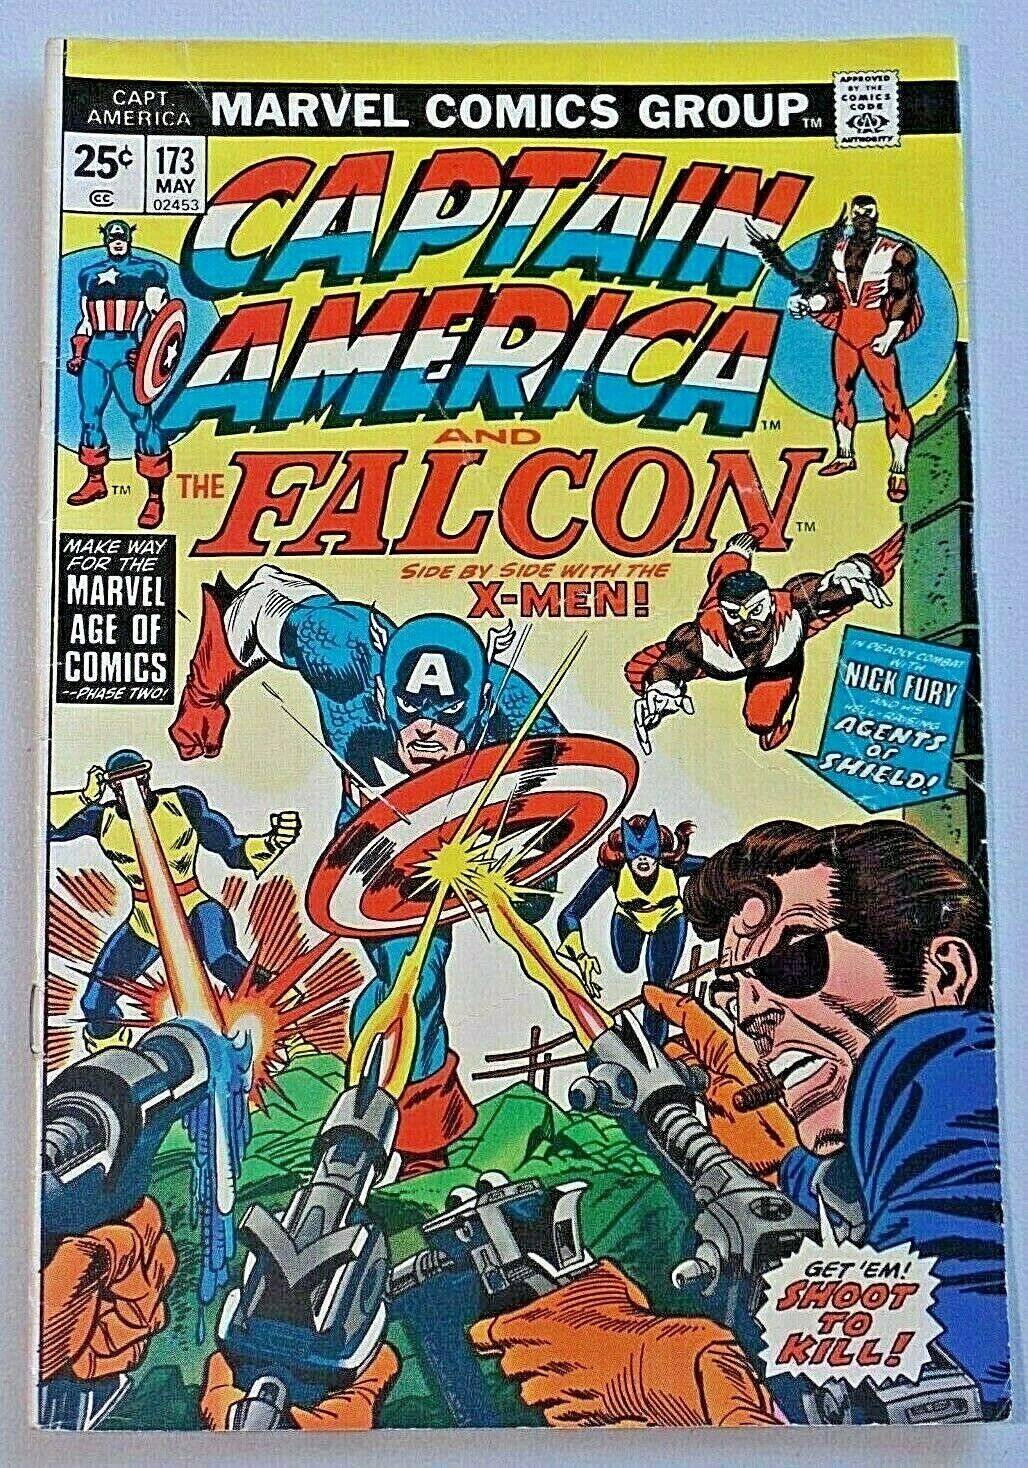 Captain America & The Falcon Side by Side with X-Men #173 Marvel Comic 1974 9735